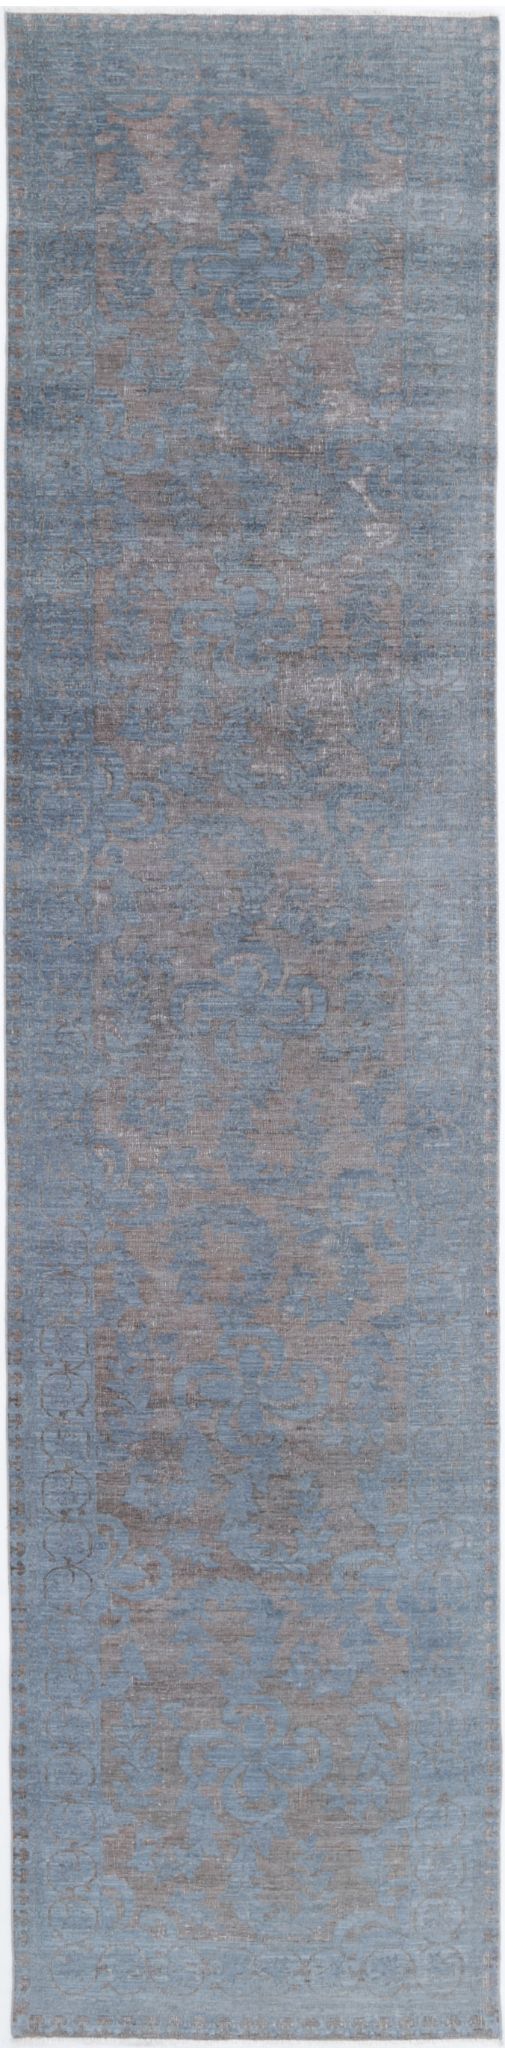 Hand Knotted Onyx Wool Rug - 3'5'' x 15'11''